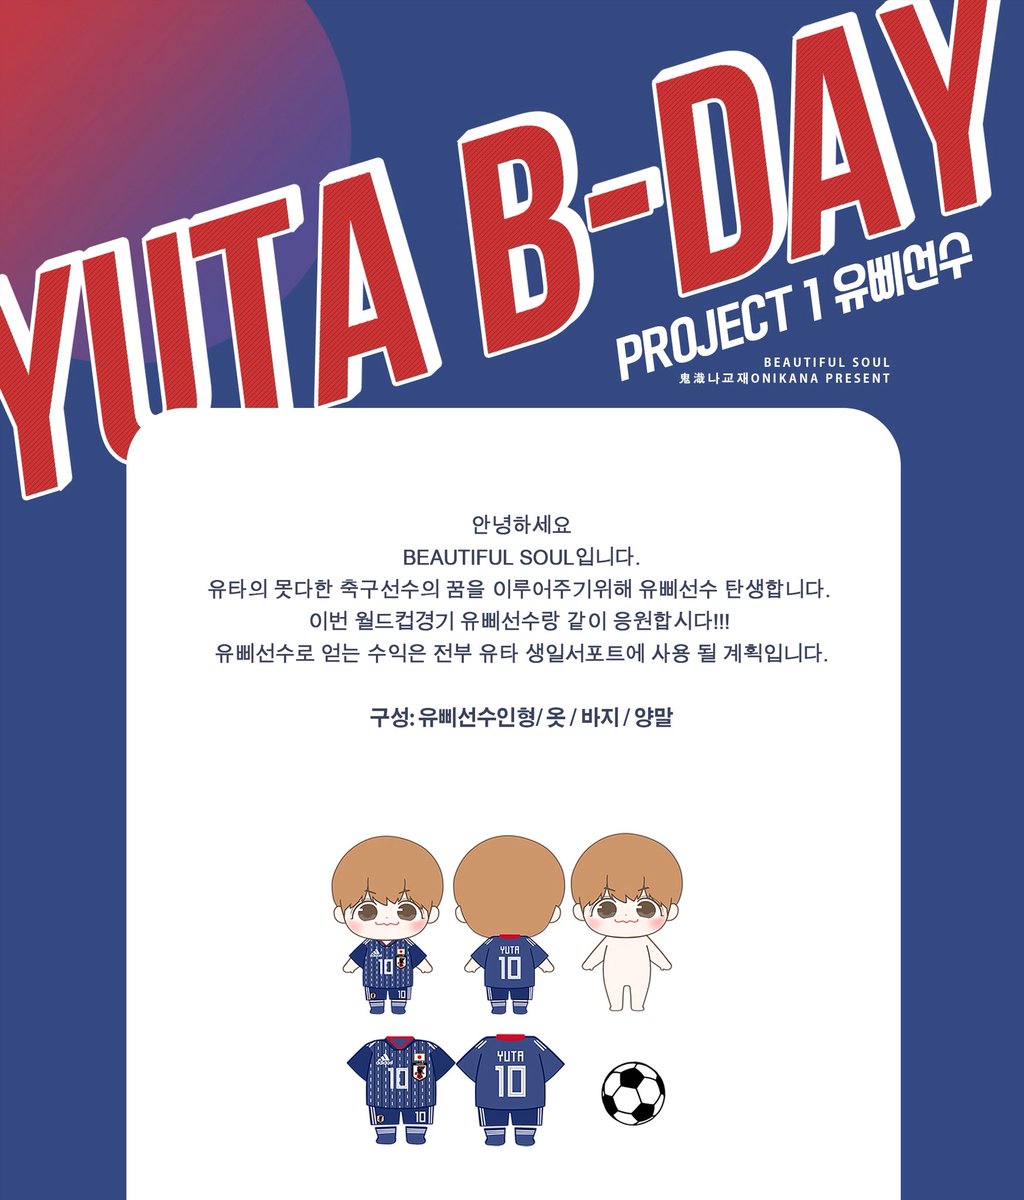 Bs Yuta B Day Project 1 유삐선수 Coming Soon